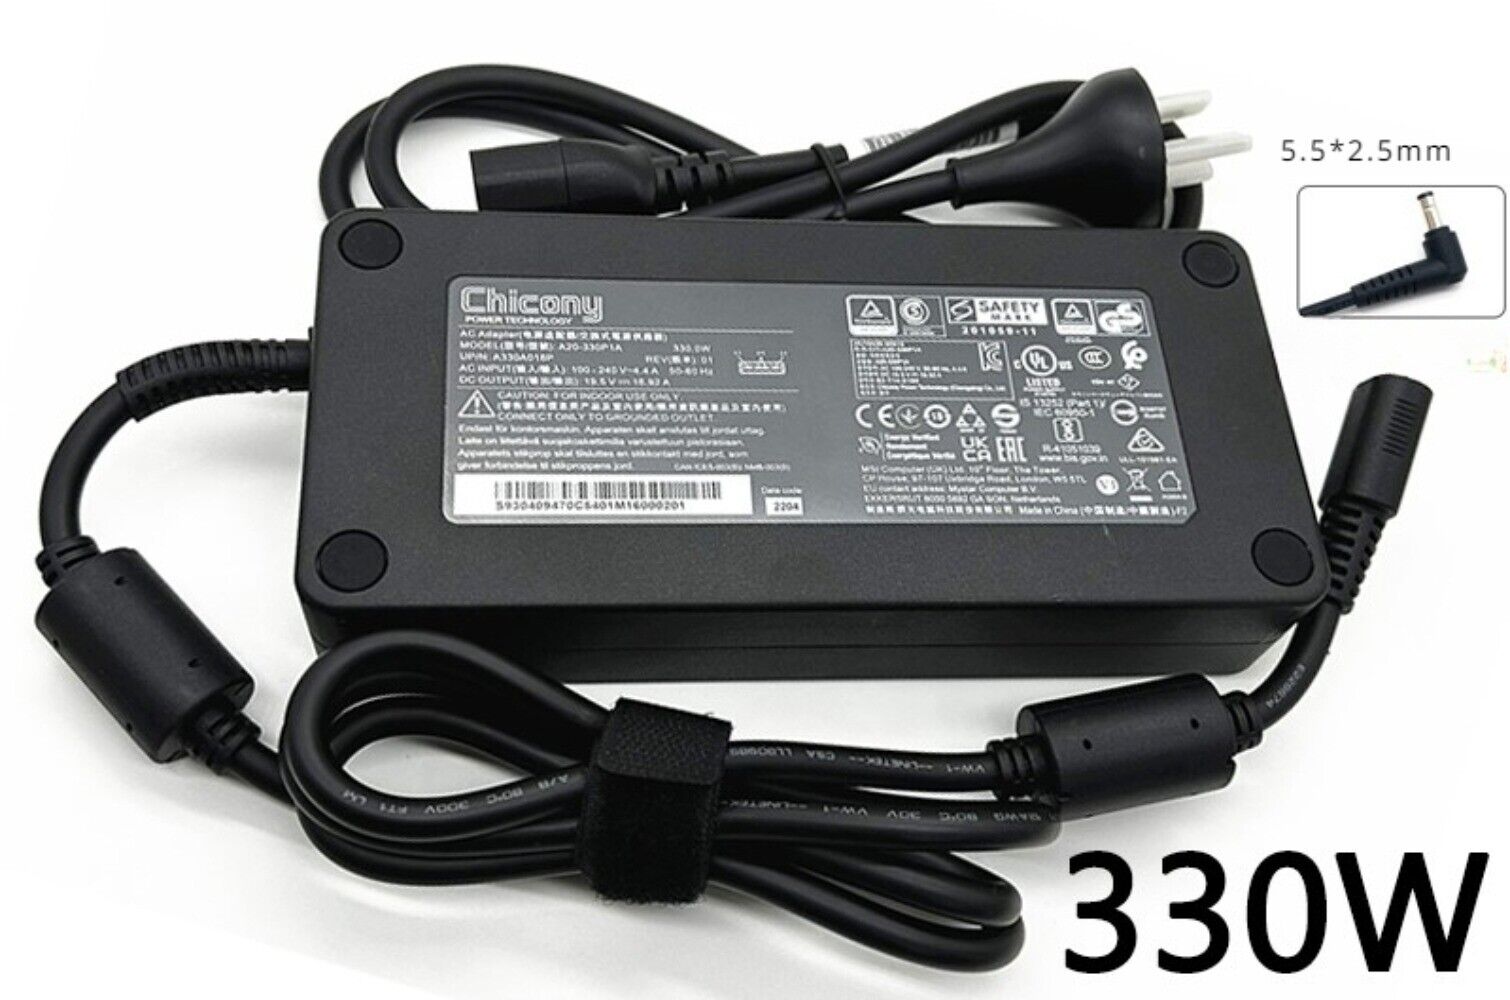 Chicony 330W 19.5V 16.92A Charger A20-330P1A 5.5*2.5mm Tip Power Adapter